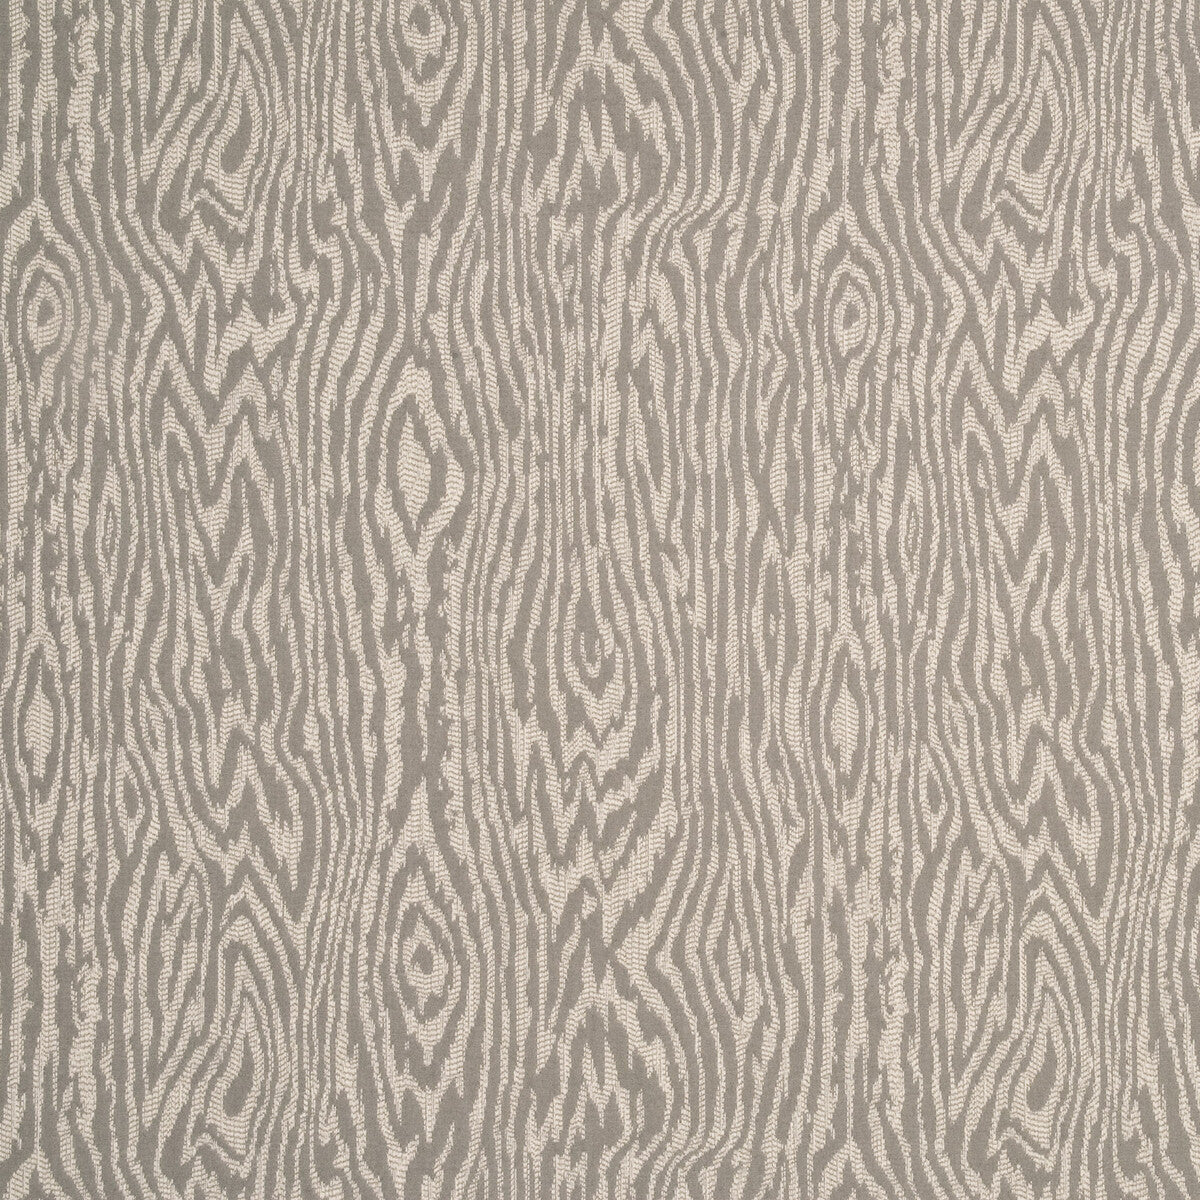 Maris fabric in stone color - pattern ED85196.140.0 - by Threads in the Threads Colour Library collection